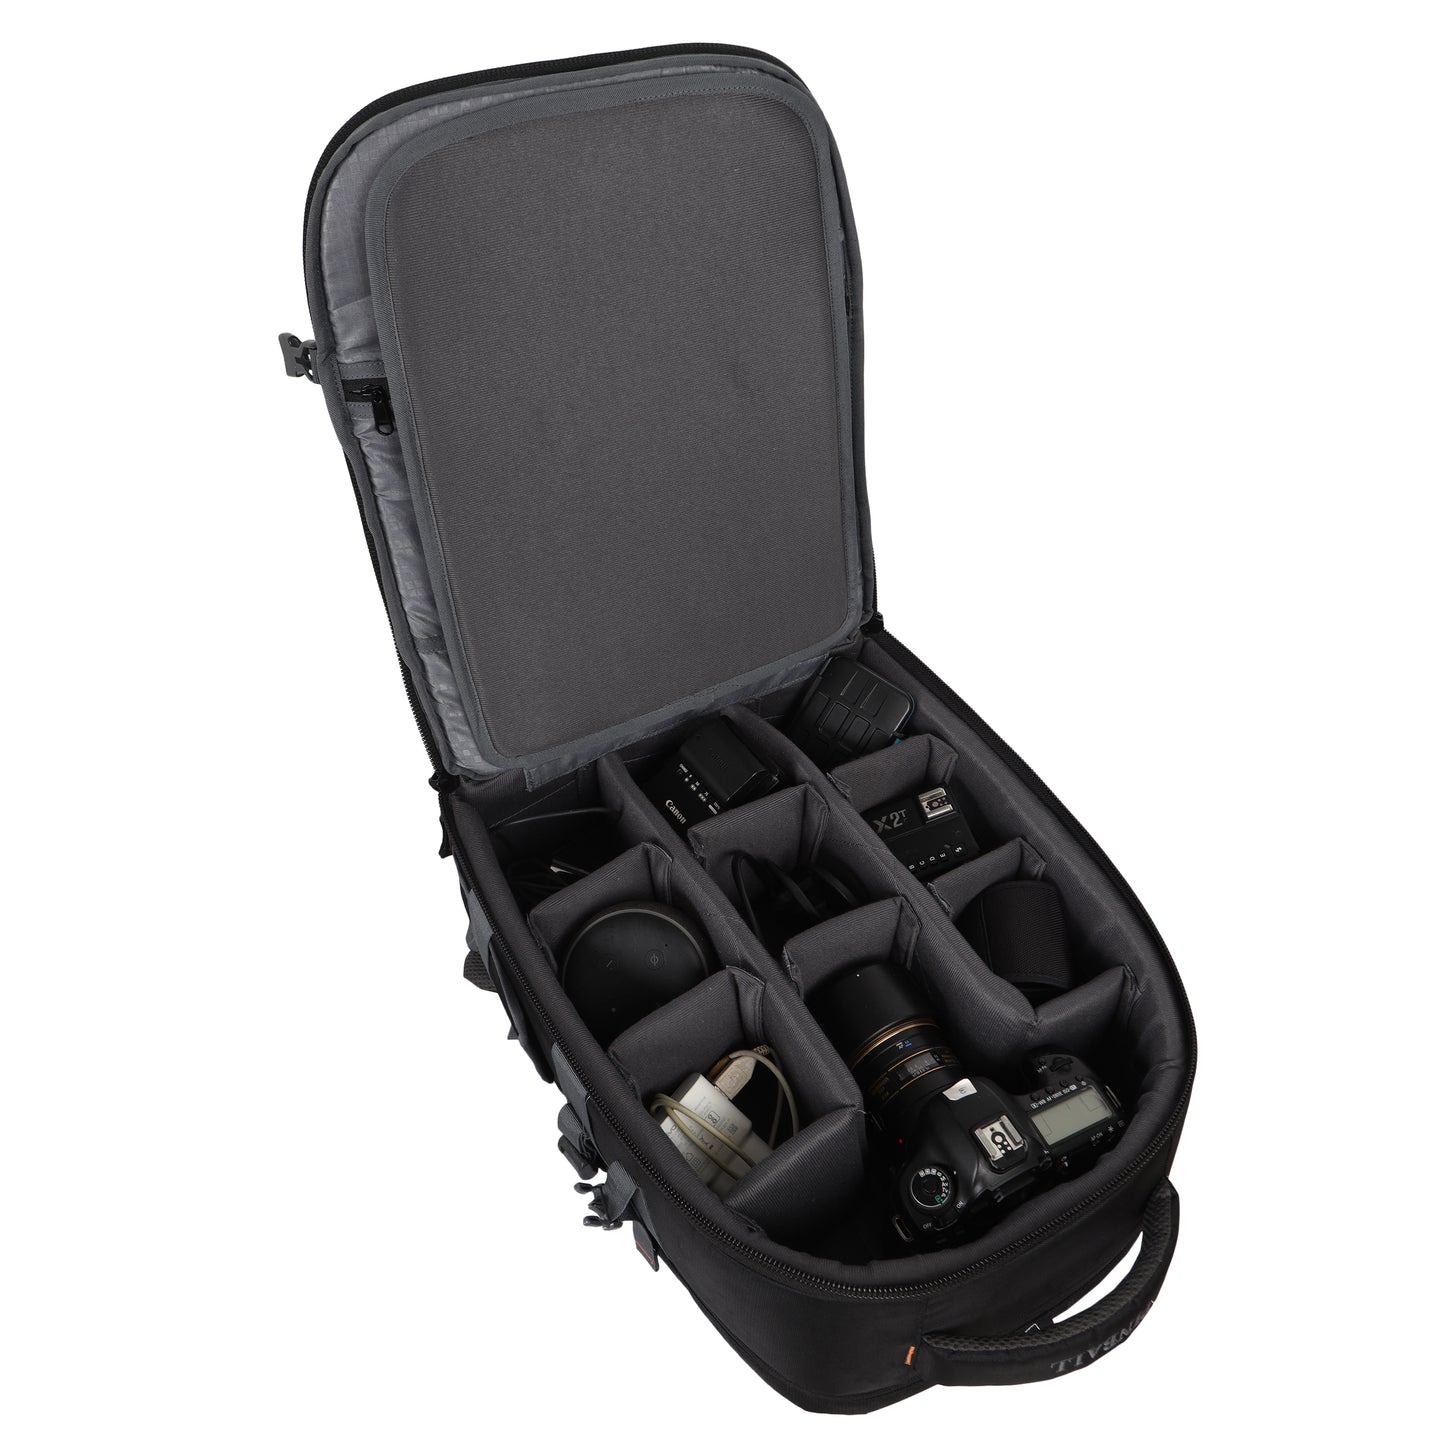 Image: Open view of the G15 Victory Pro DSLR camera bag, revealing a well-organized array of cameras, lenses, tripods, flashes, and various photography accessories. The bag's spacious compartments and customizable dividers ensure convenient storage and easy access to all your essential gear during professional photo shoots.